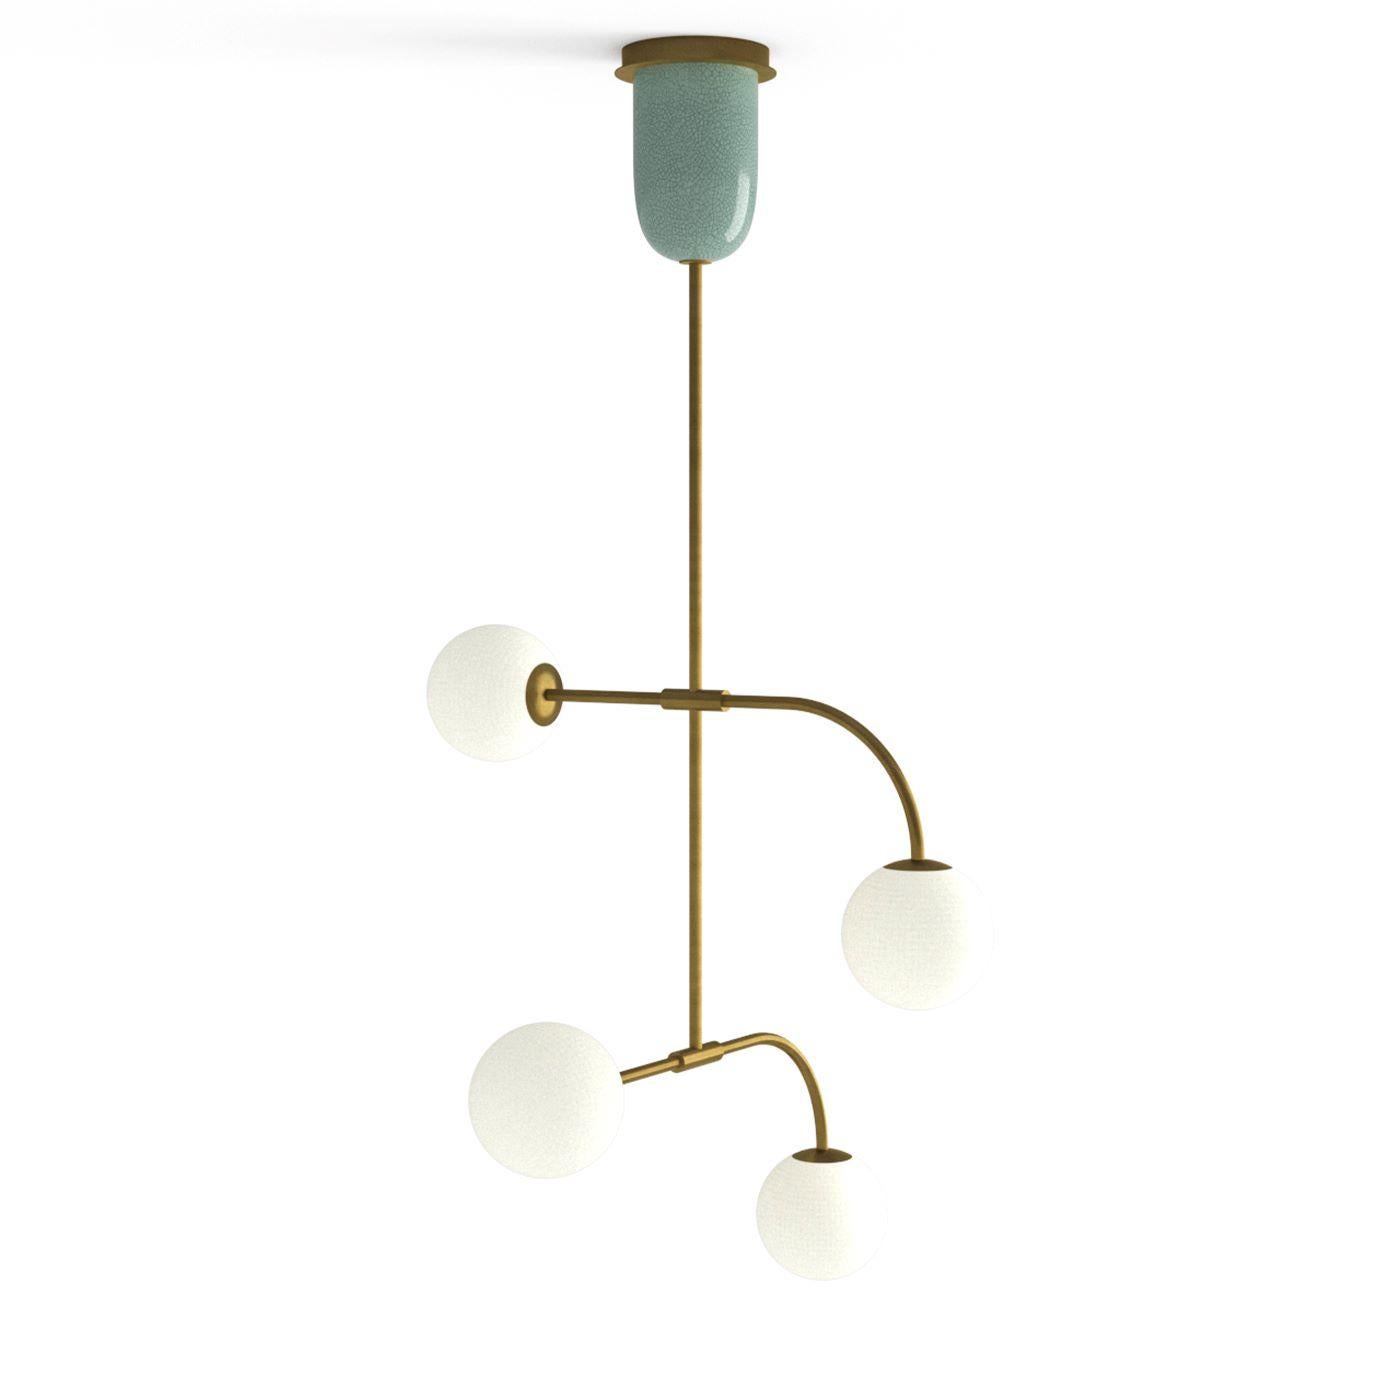 A graceful brushed bronze frame enriched with a light-blue-glazed ceramic element fitted to the ceiling mount distinguishes this elegant pendant lamp. Distilling soft vintage flair, four arms - two of which are marked by a downward curve - support